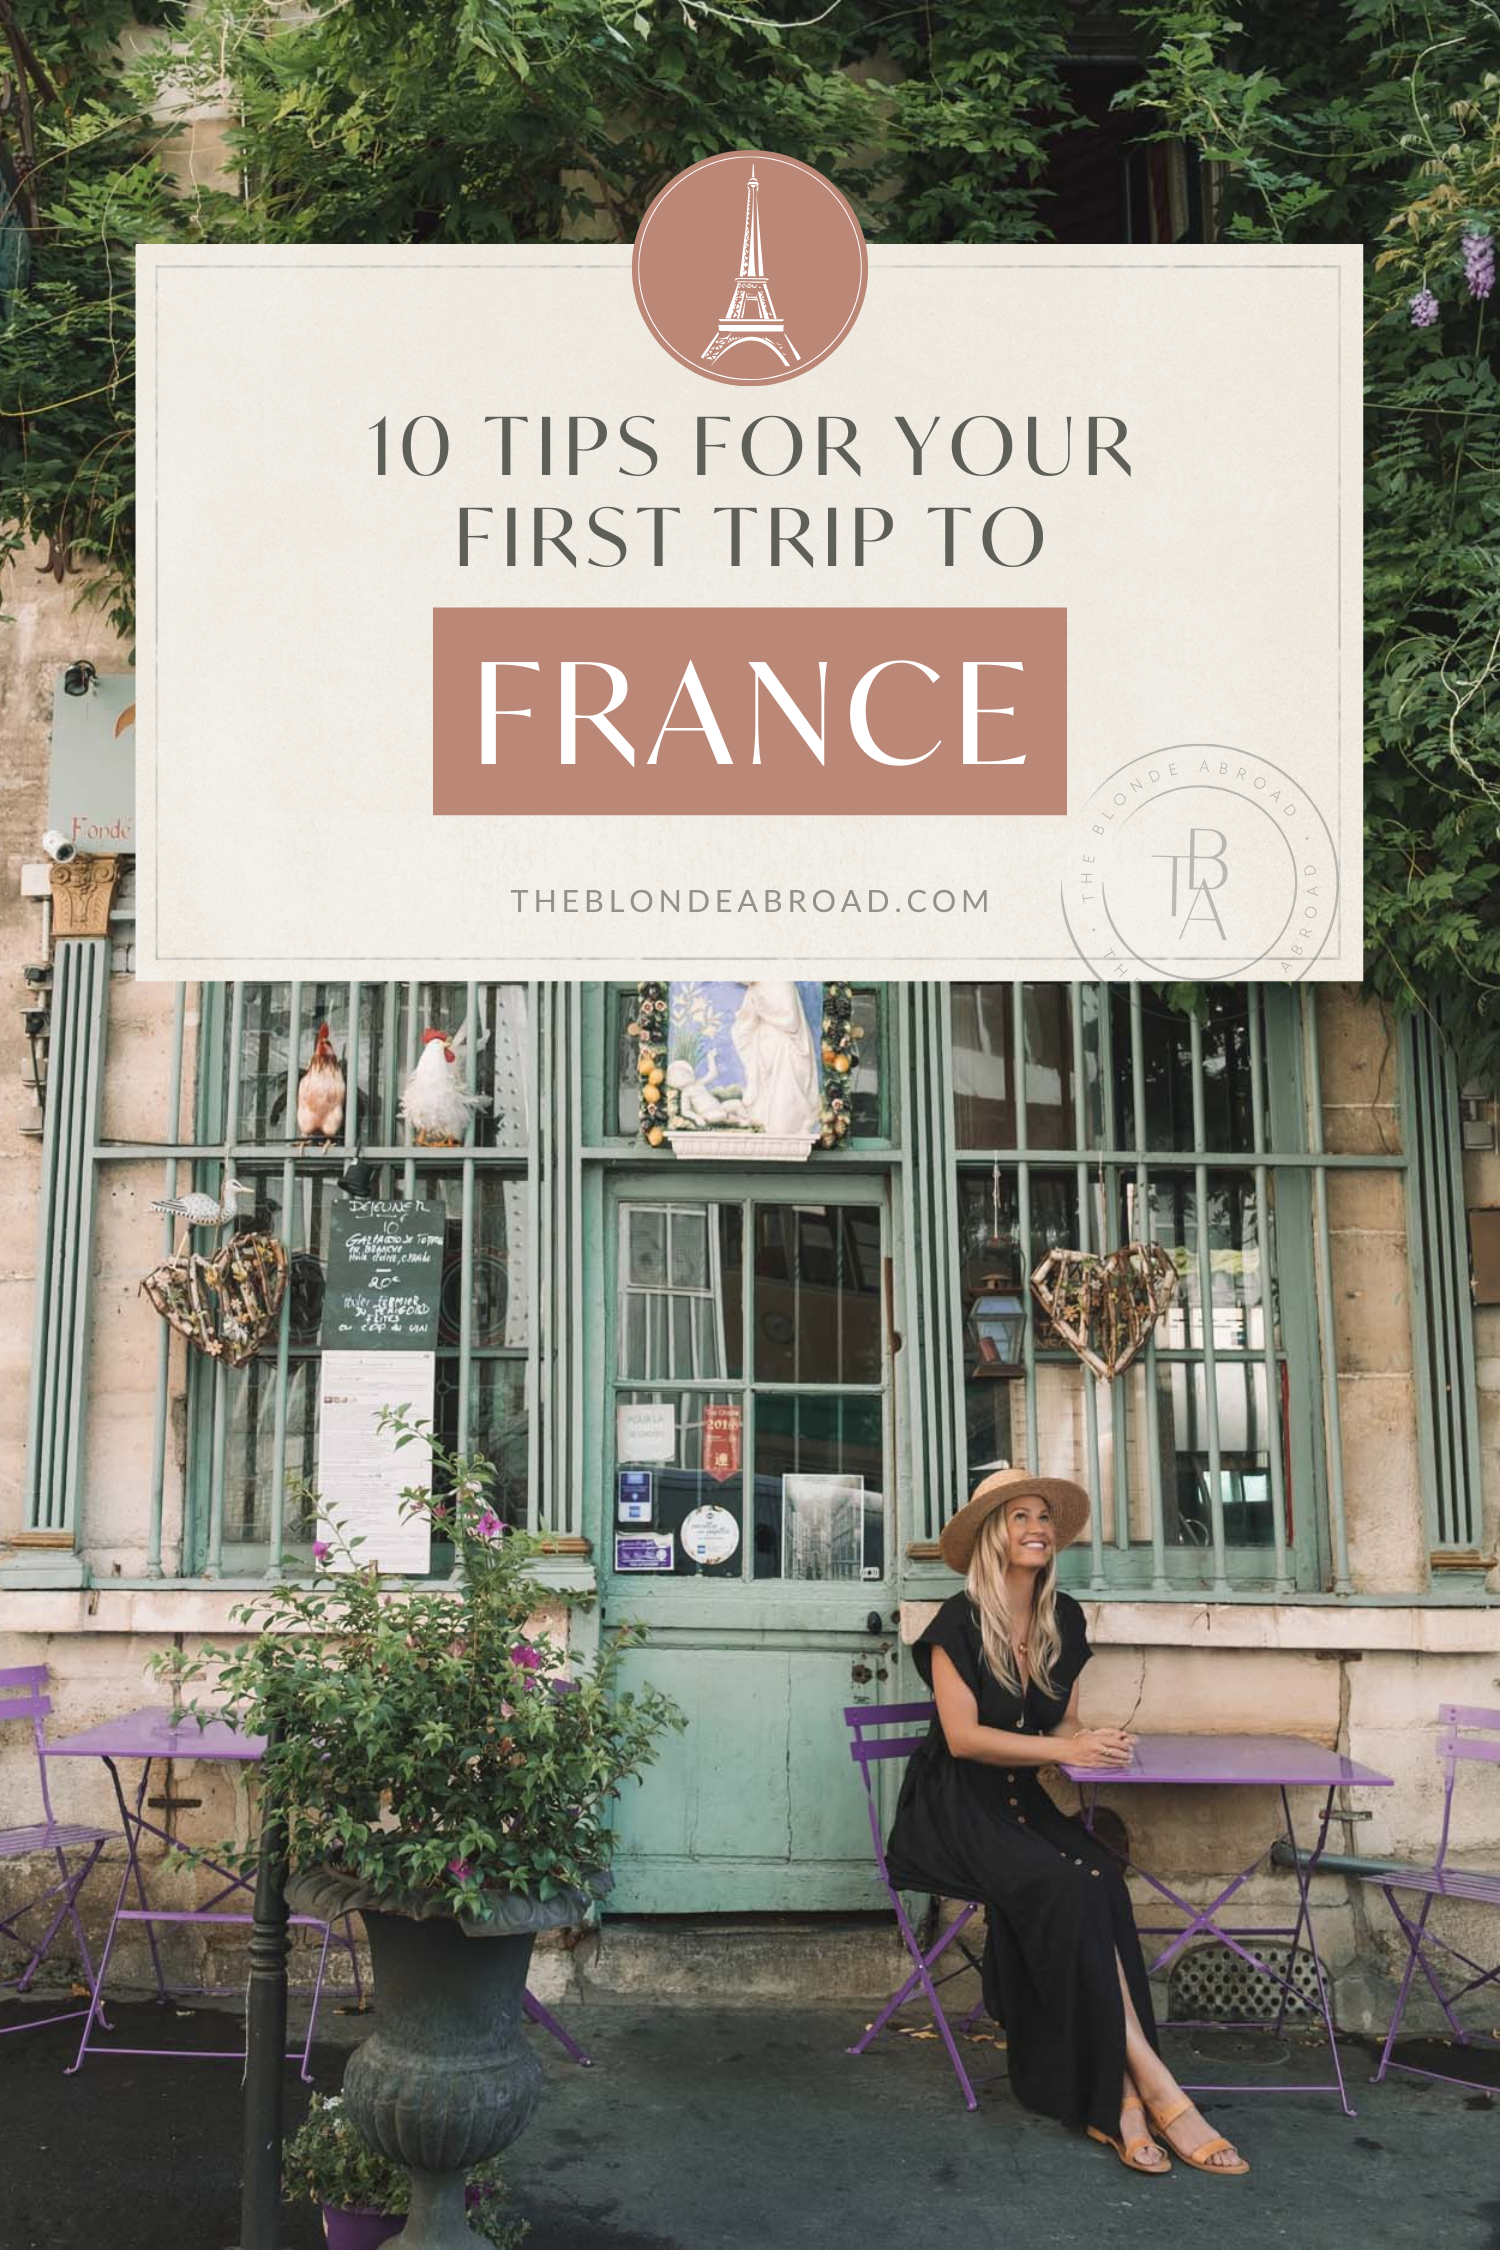 10 Tips for Your First Trip to France